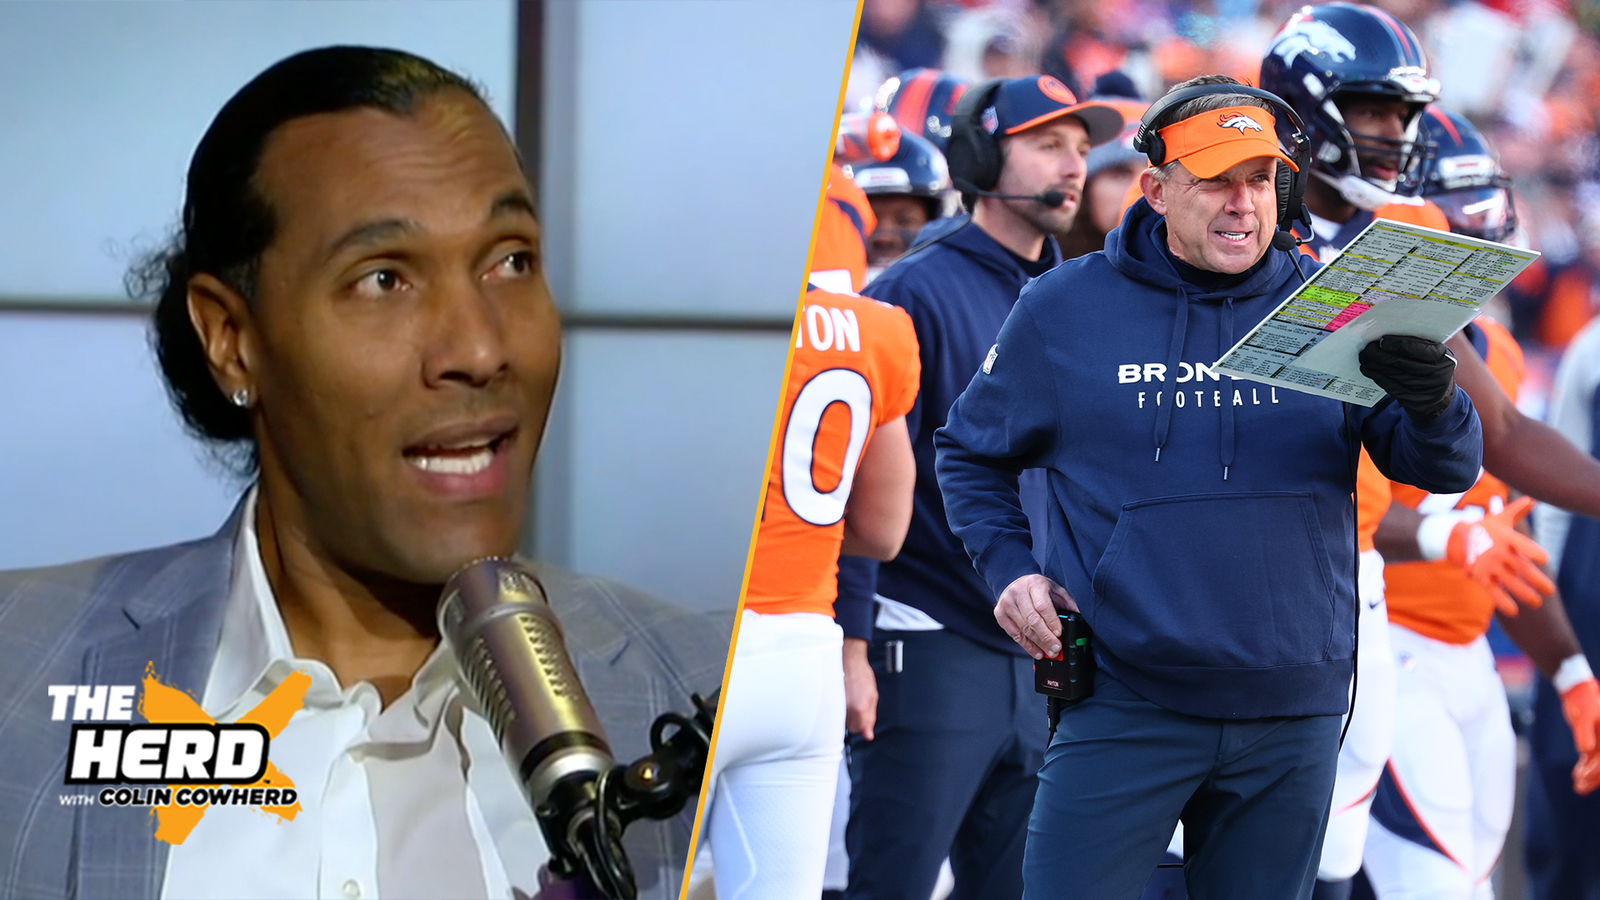 Sean Payton's Broncos win 5th straight, is Russell Wilson back? 